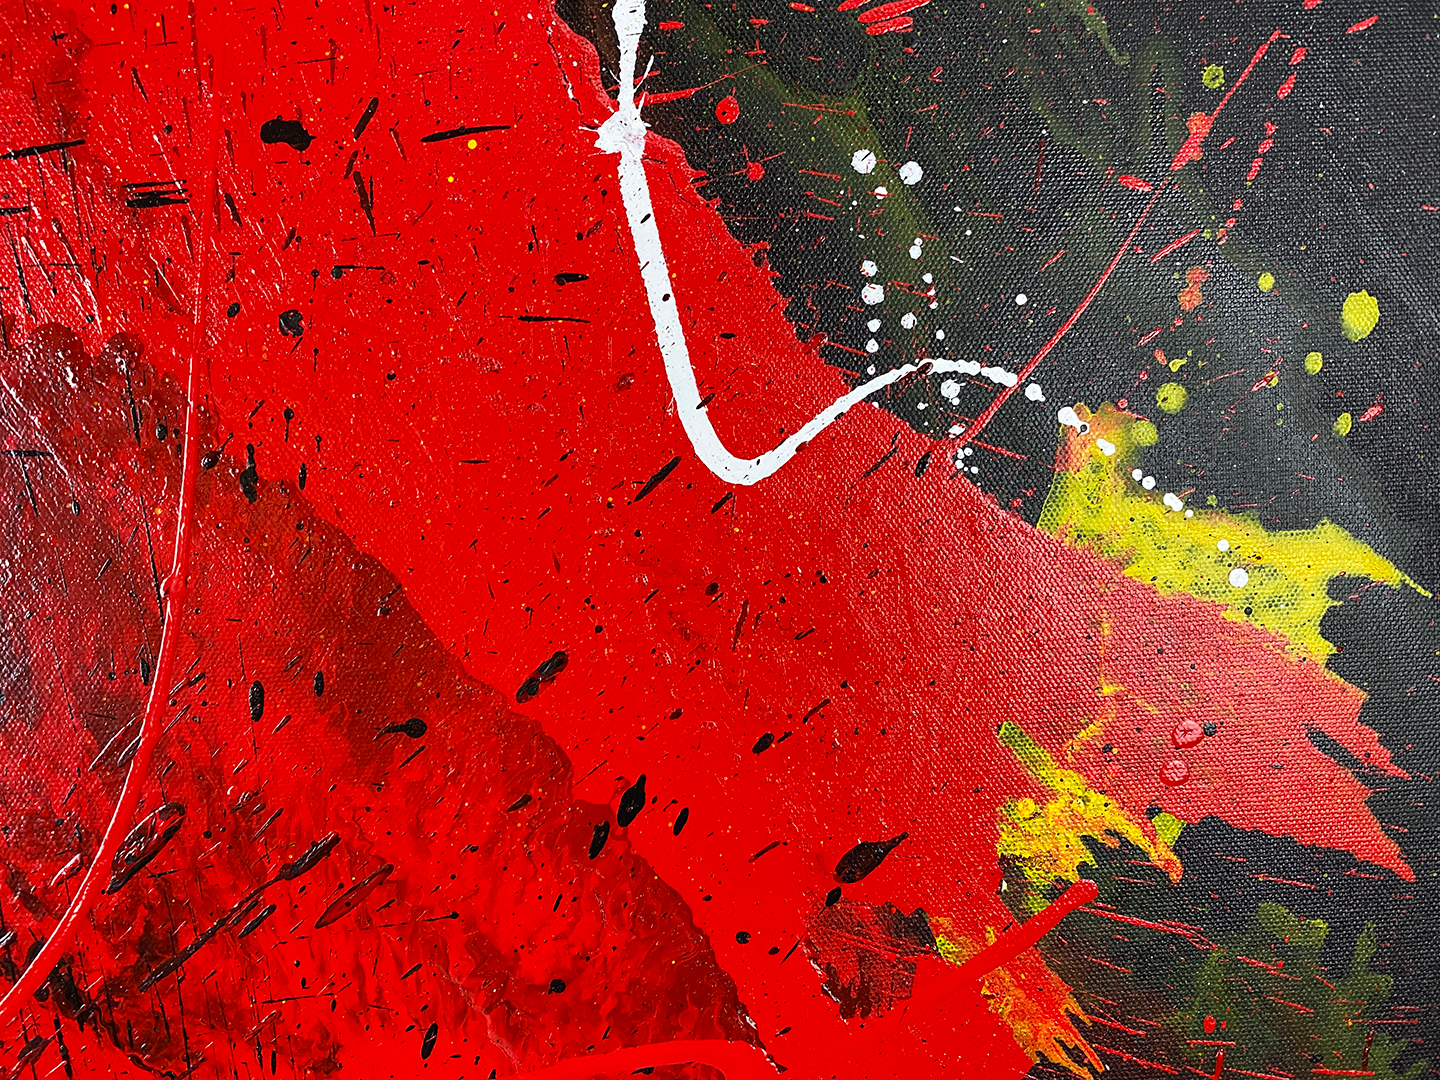 Abstract, expressionism, acrylic painting close-up 3. Exciting explosion of bright red, black, yellow and white on a Gallery-Wrapped canvas